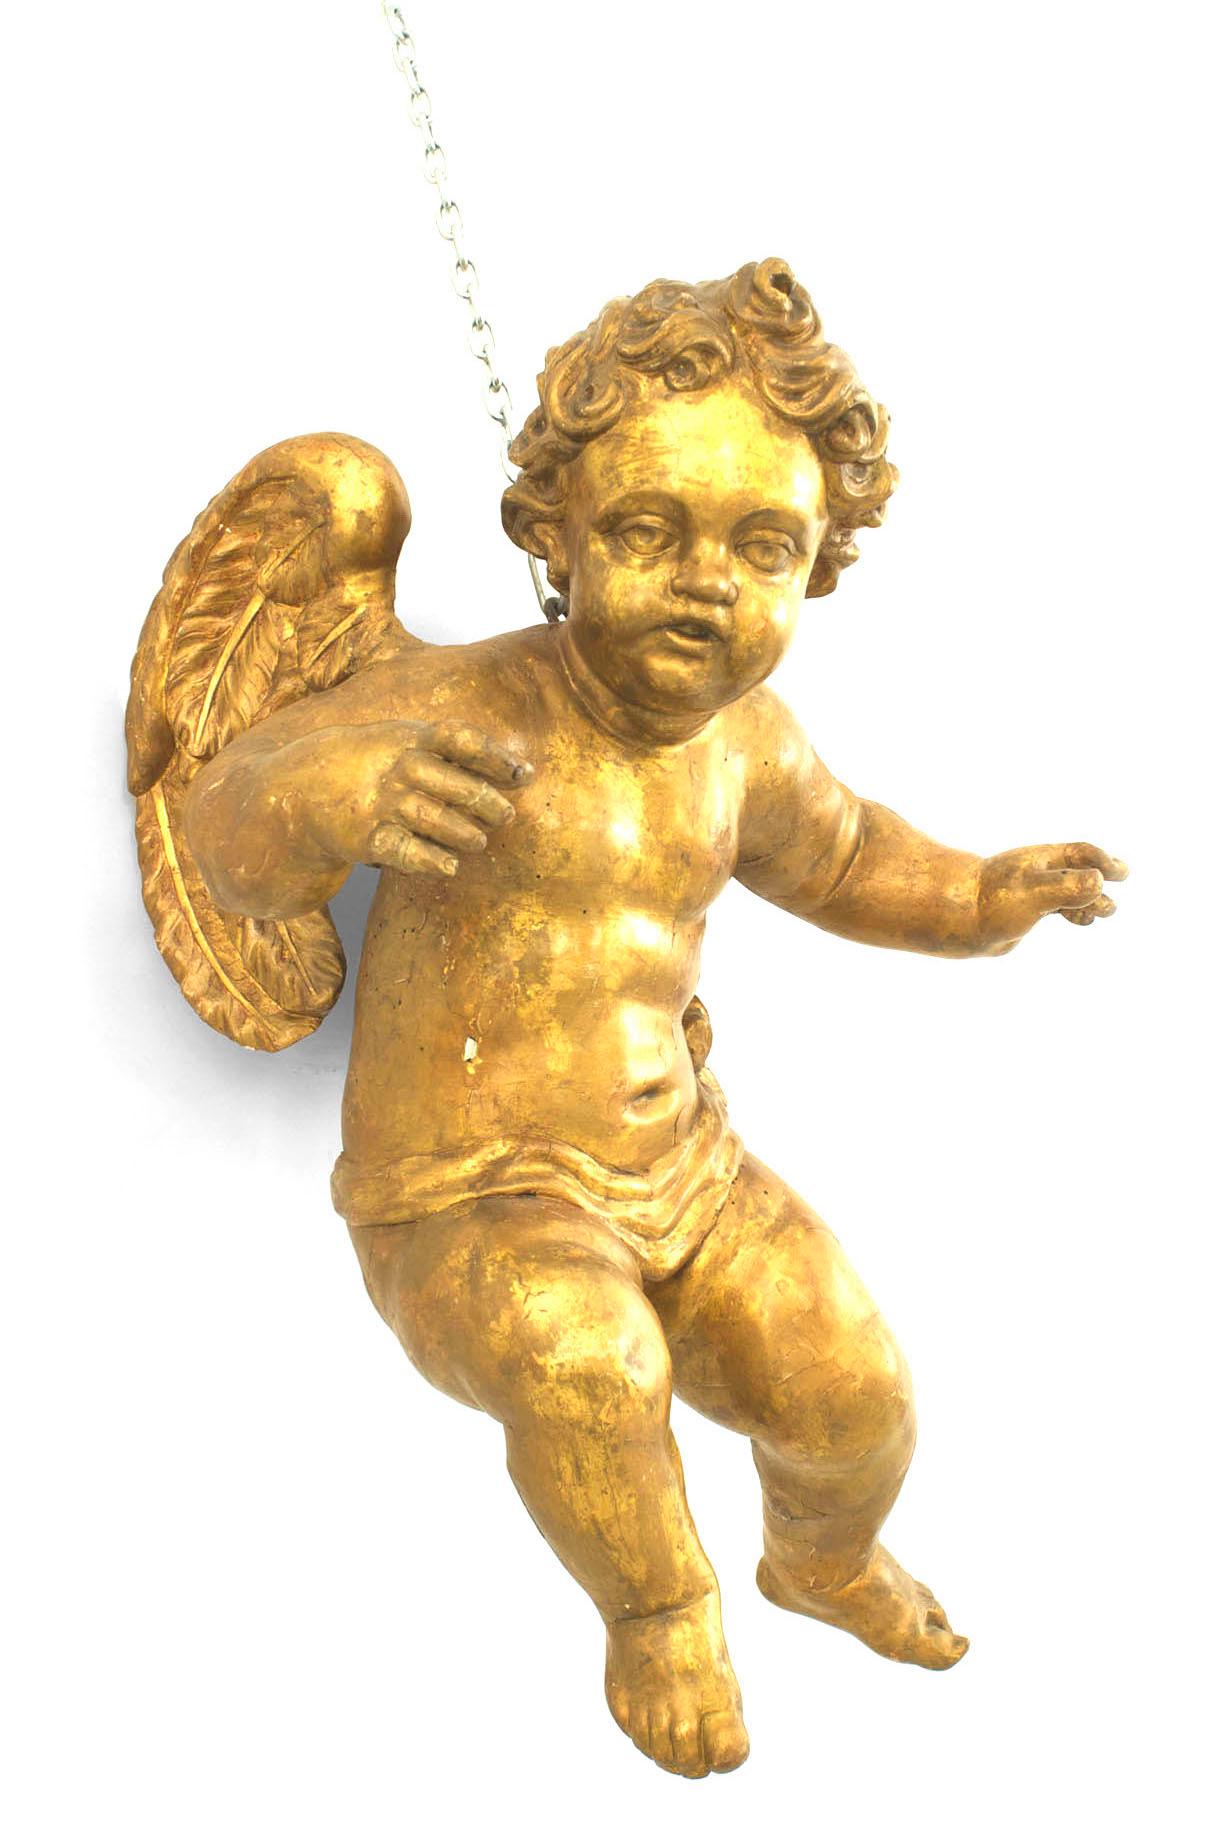 Pair of Italian Rococo style (18th Cent) carved gilt wood winged life size hanging cupid figures.
